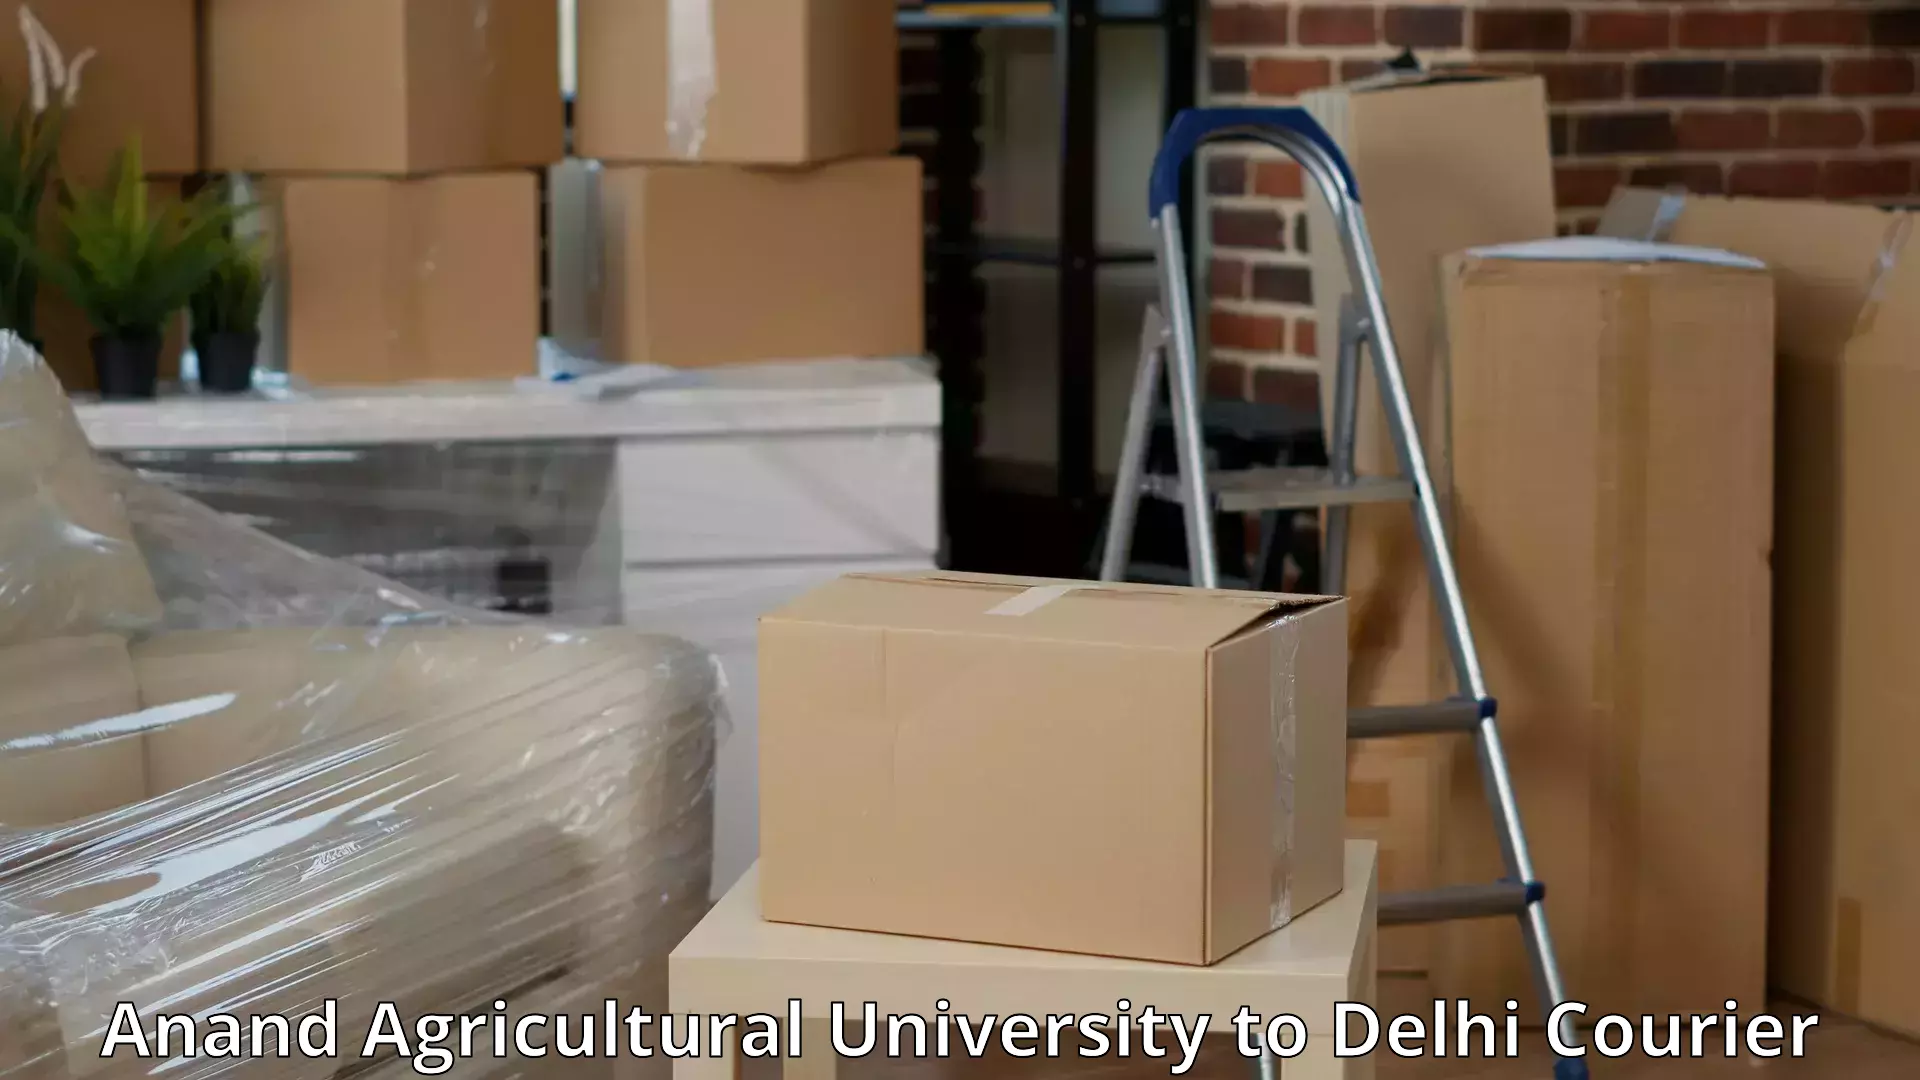 Efficient home relocation Anand Agricultural University to Jamia Millia Islamia New Delhi